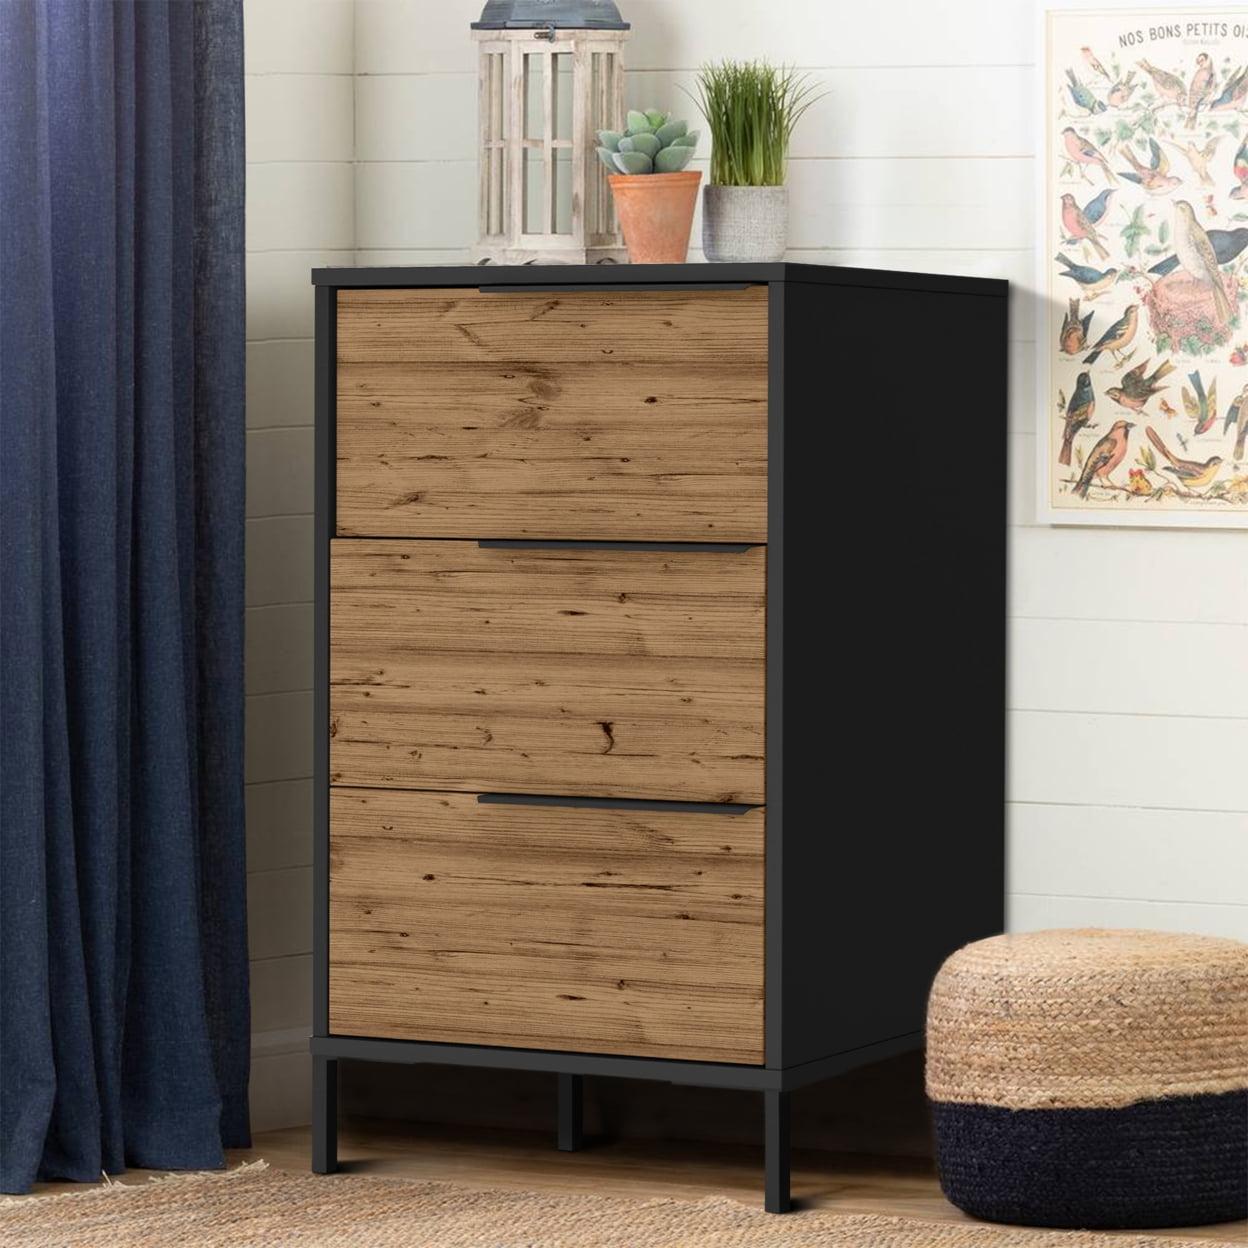 Rustic Dual-Tone Office Storage Cabinet with 3 Drawers, Brown and Black